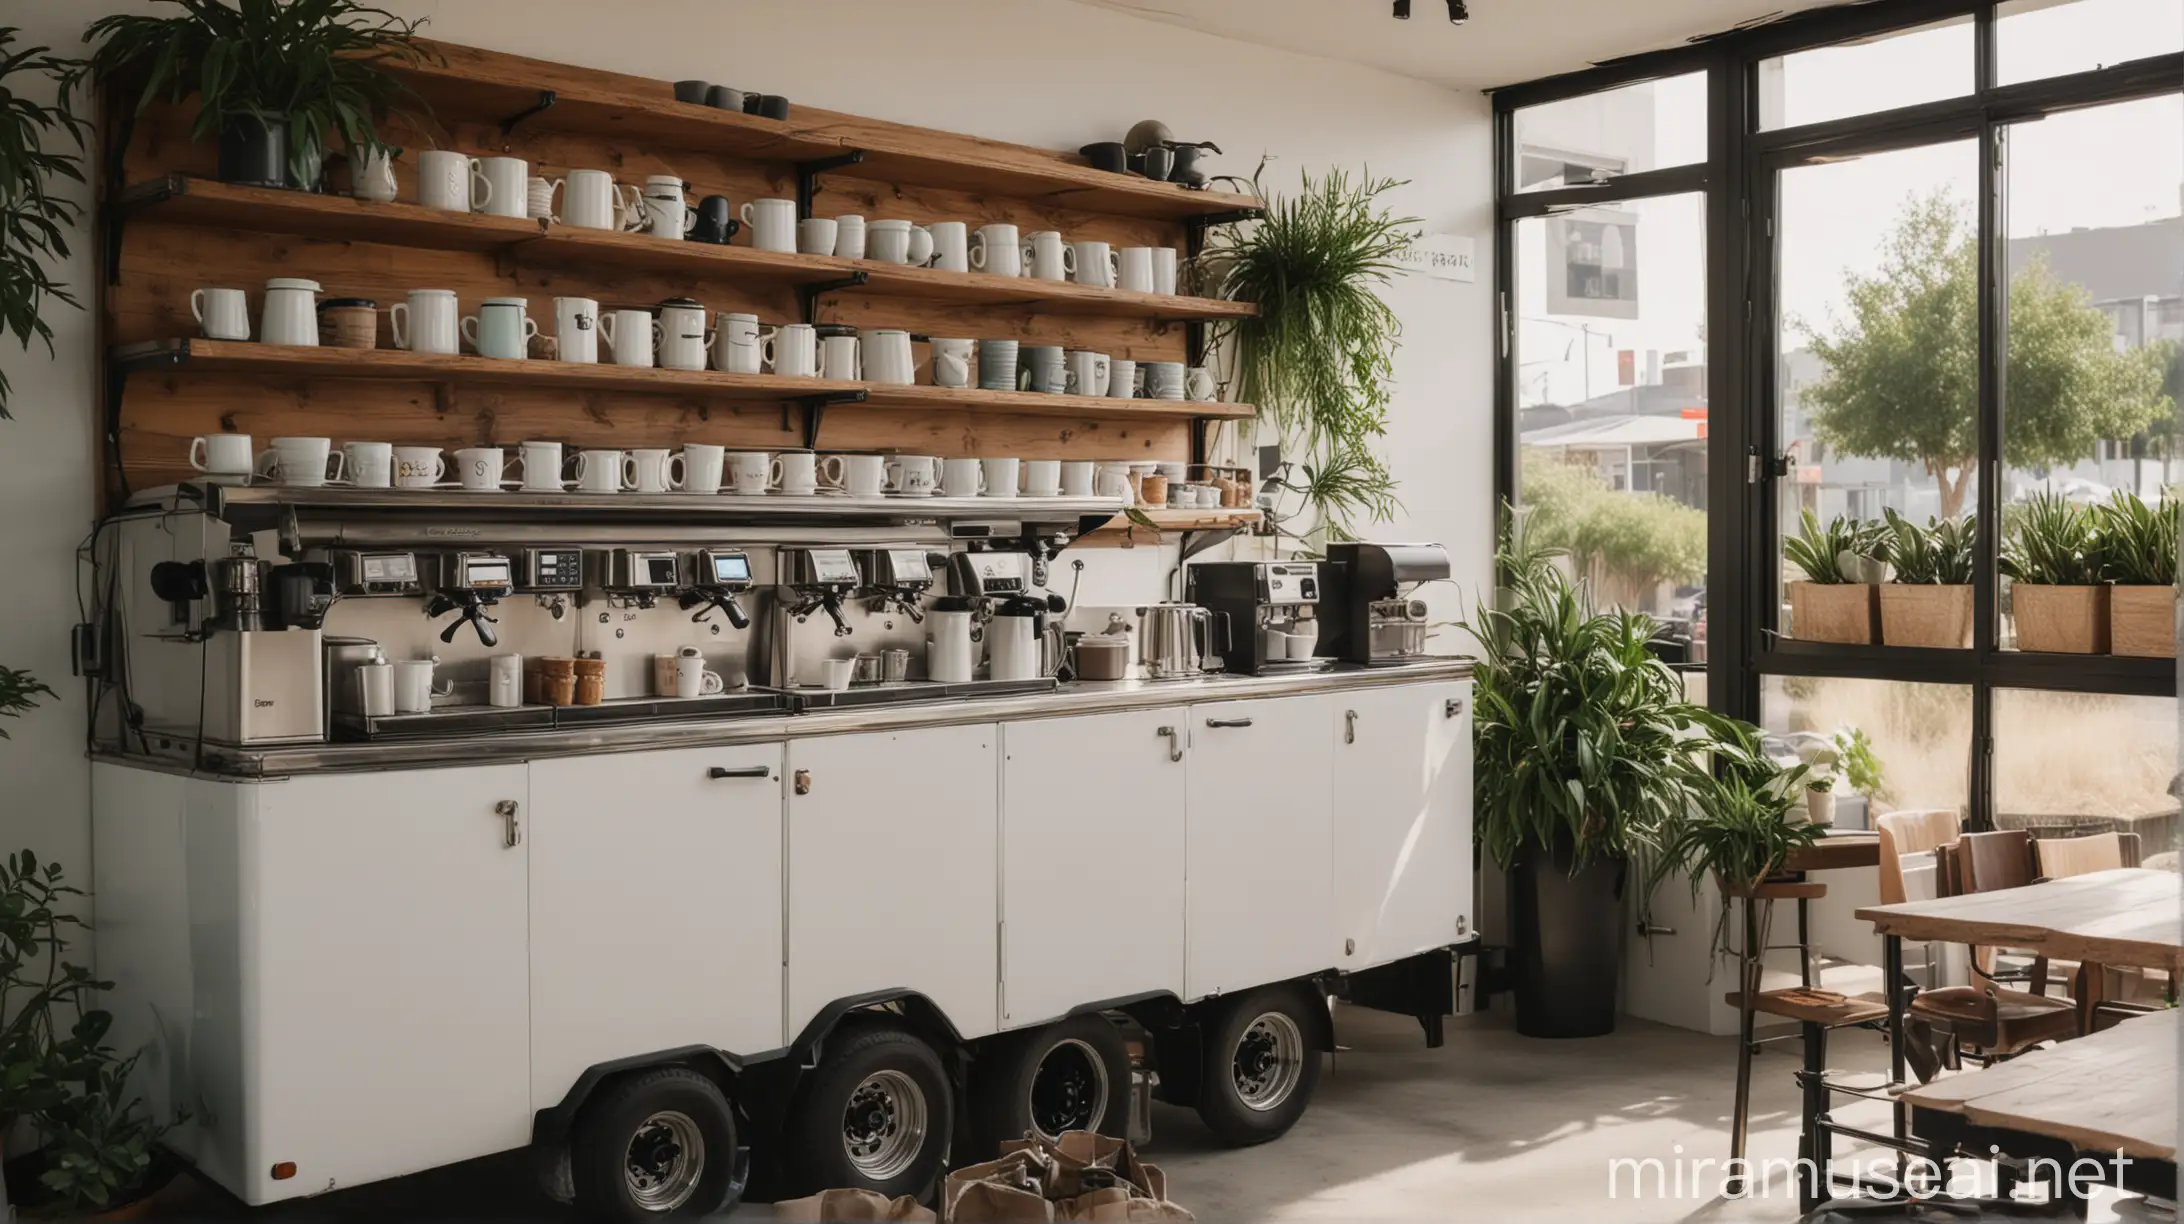 Sleek White Coffee Truck Interior with Minimalist Design and Vibrant Green Plant